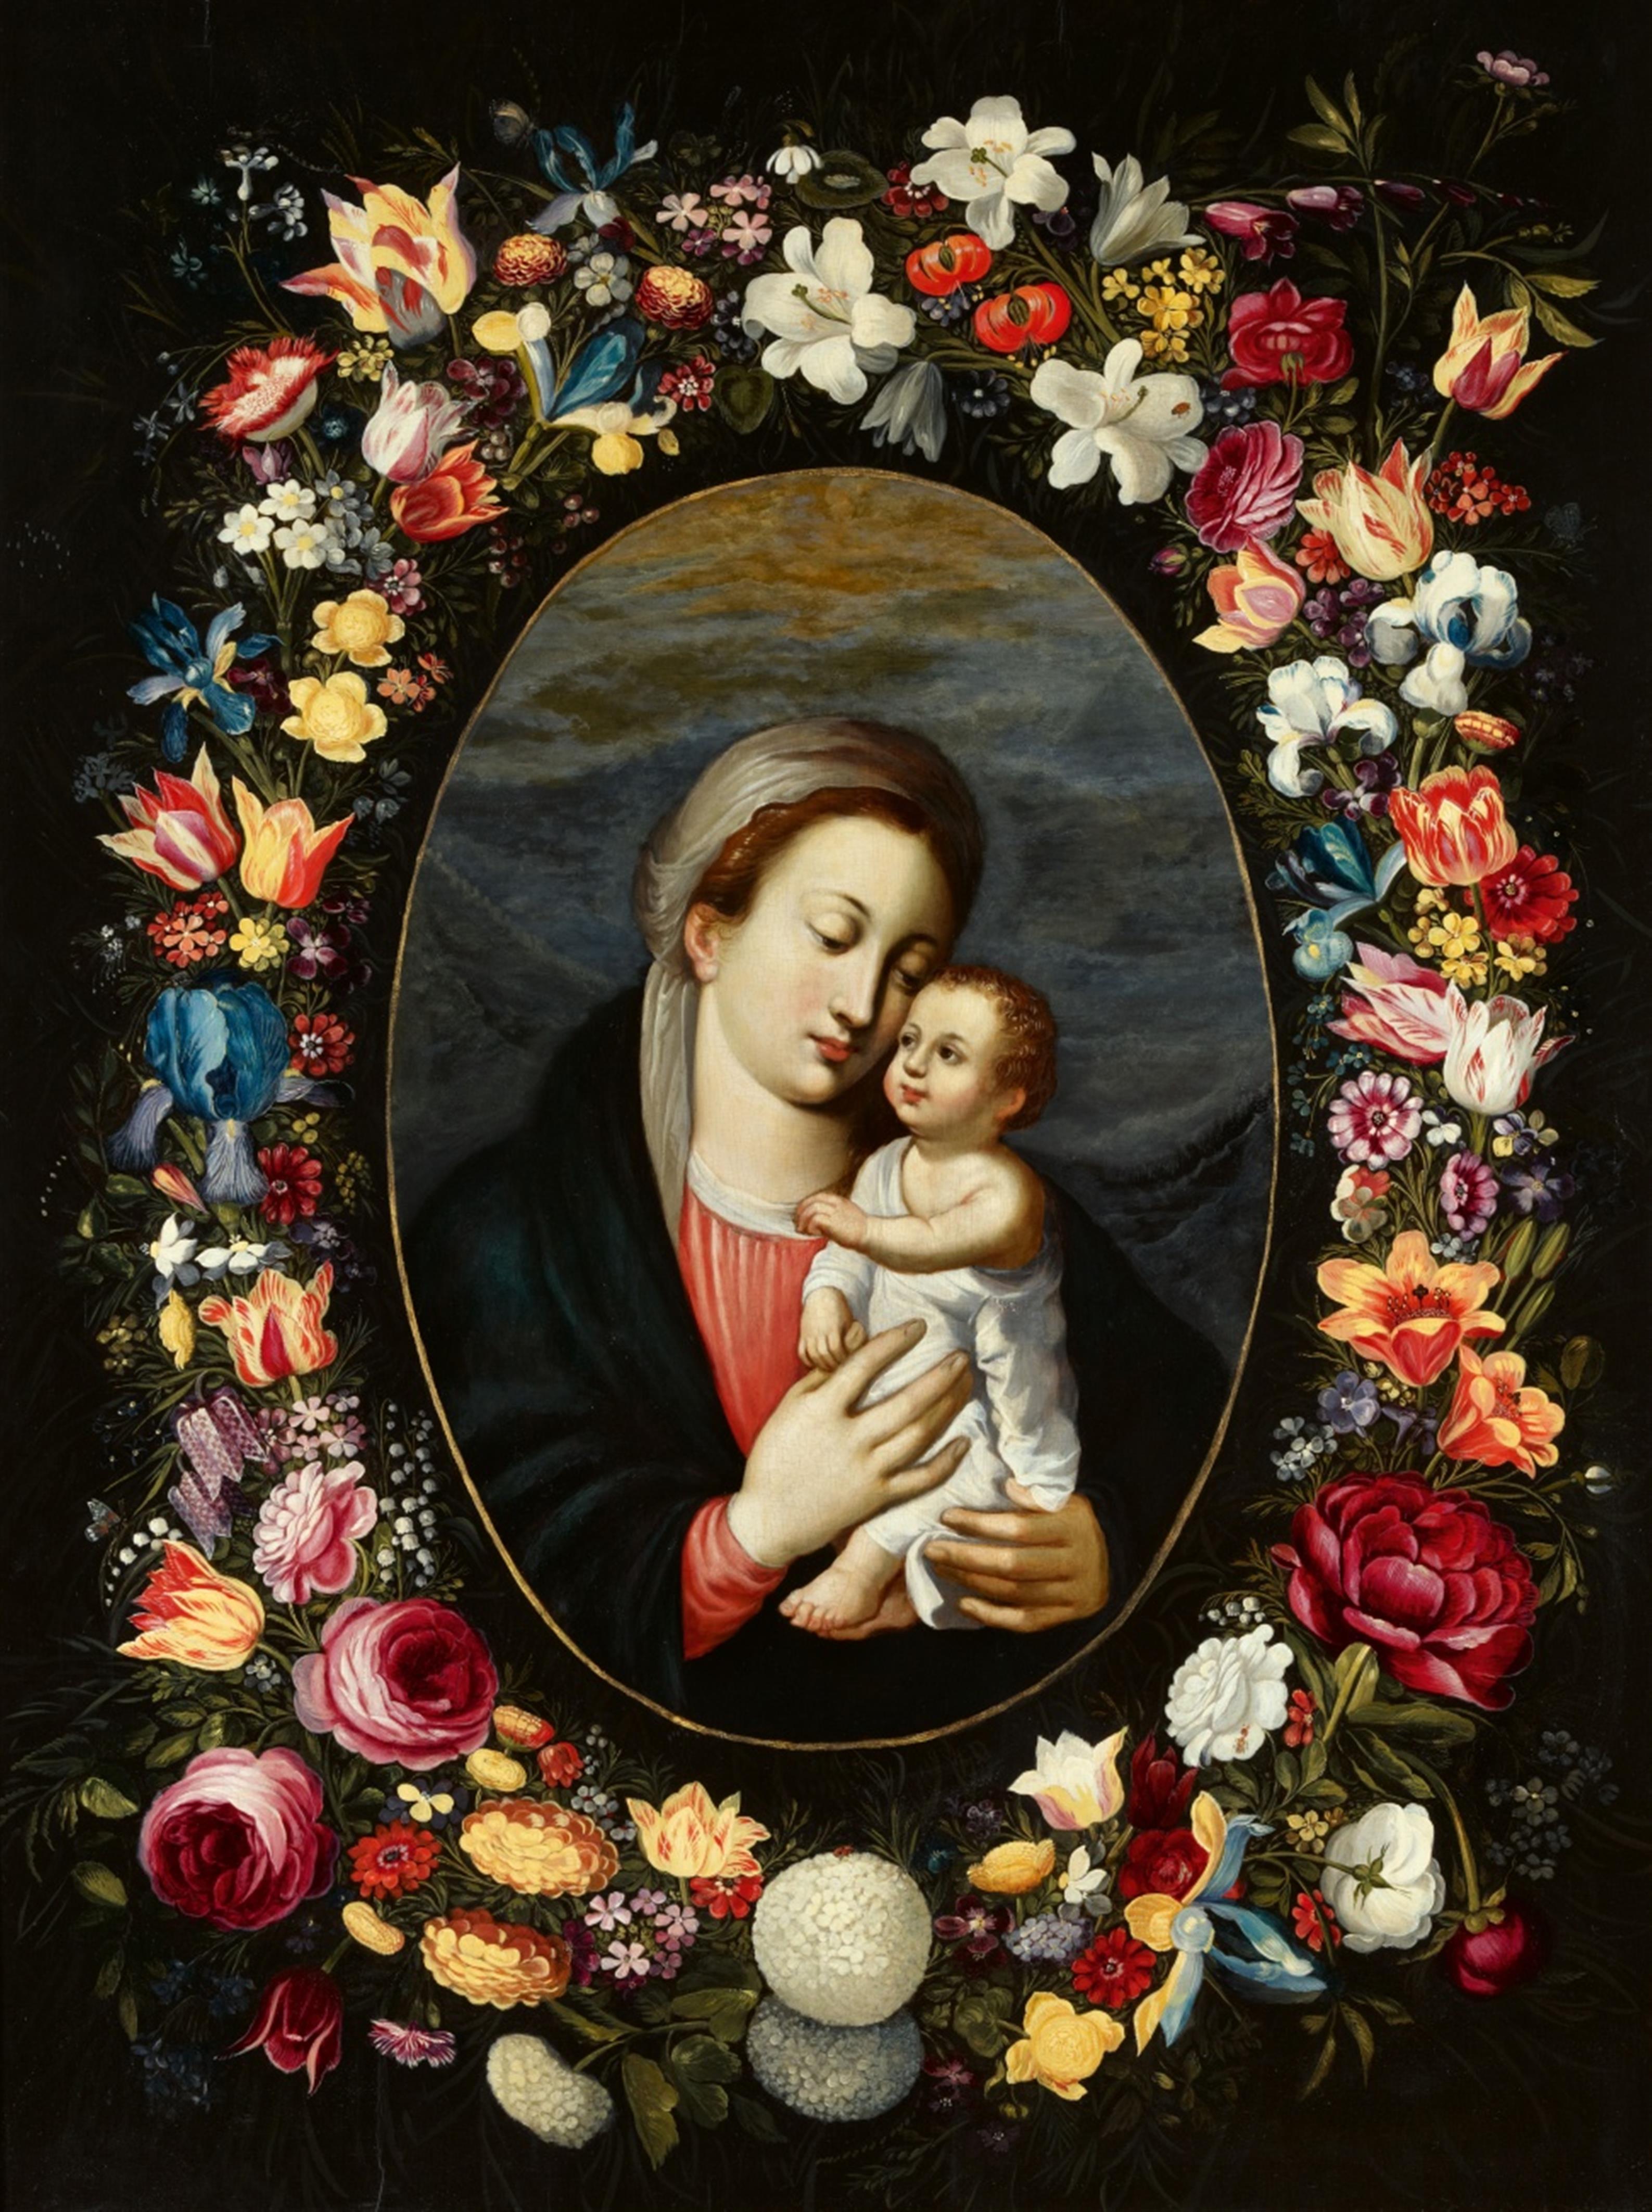 Jan Brueghel the Younger
Jan van Balen - The Virgin and Child in a Floral Wreath - image-1